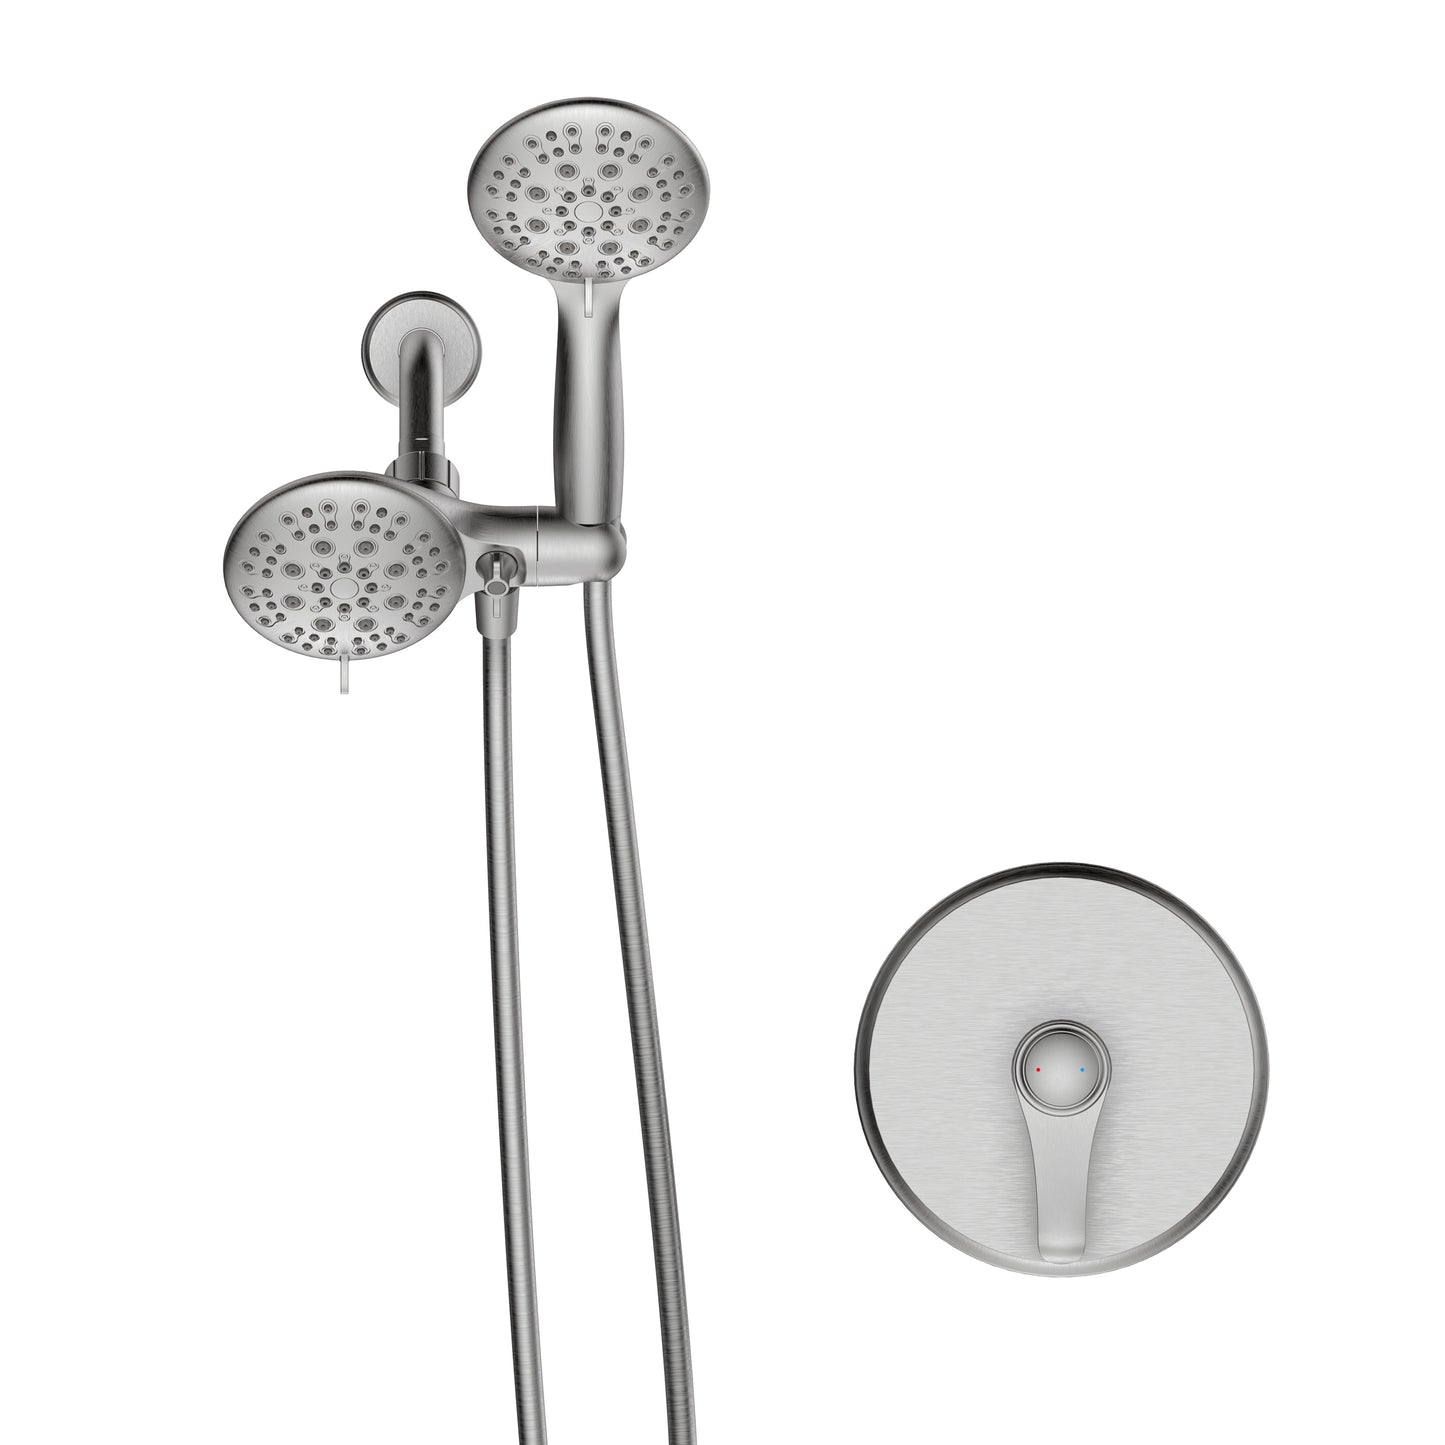 Large Amount of water Multi Function Dual Shower Head - Shower System with 4." Rain Showerhead, 6-Function Hand Shower, Brushed Nickel